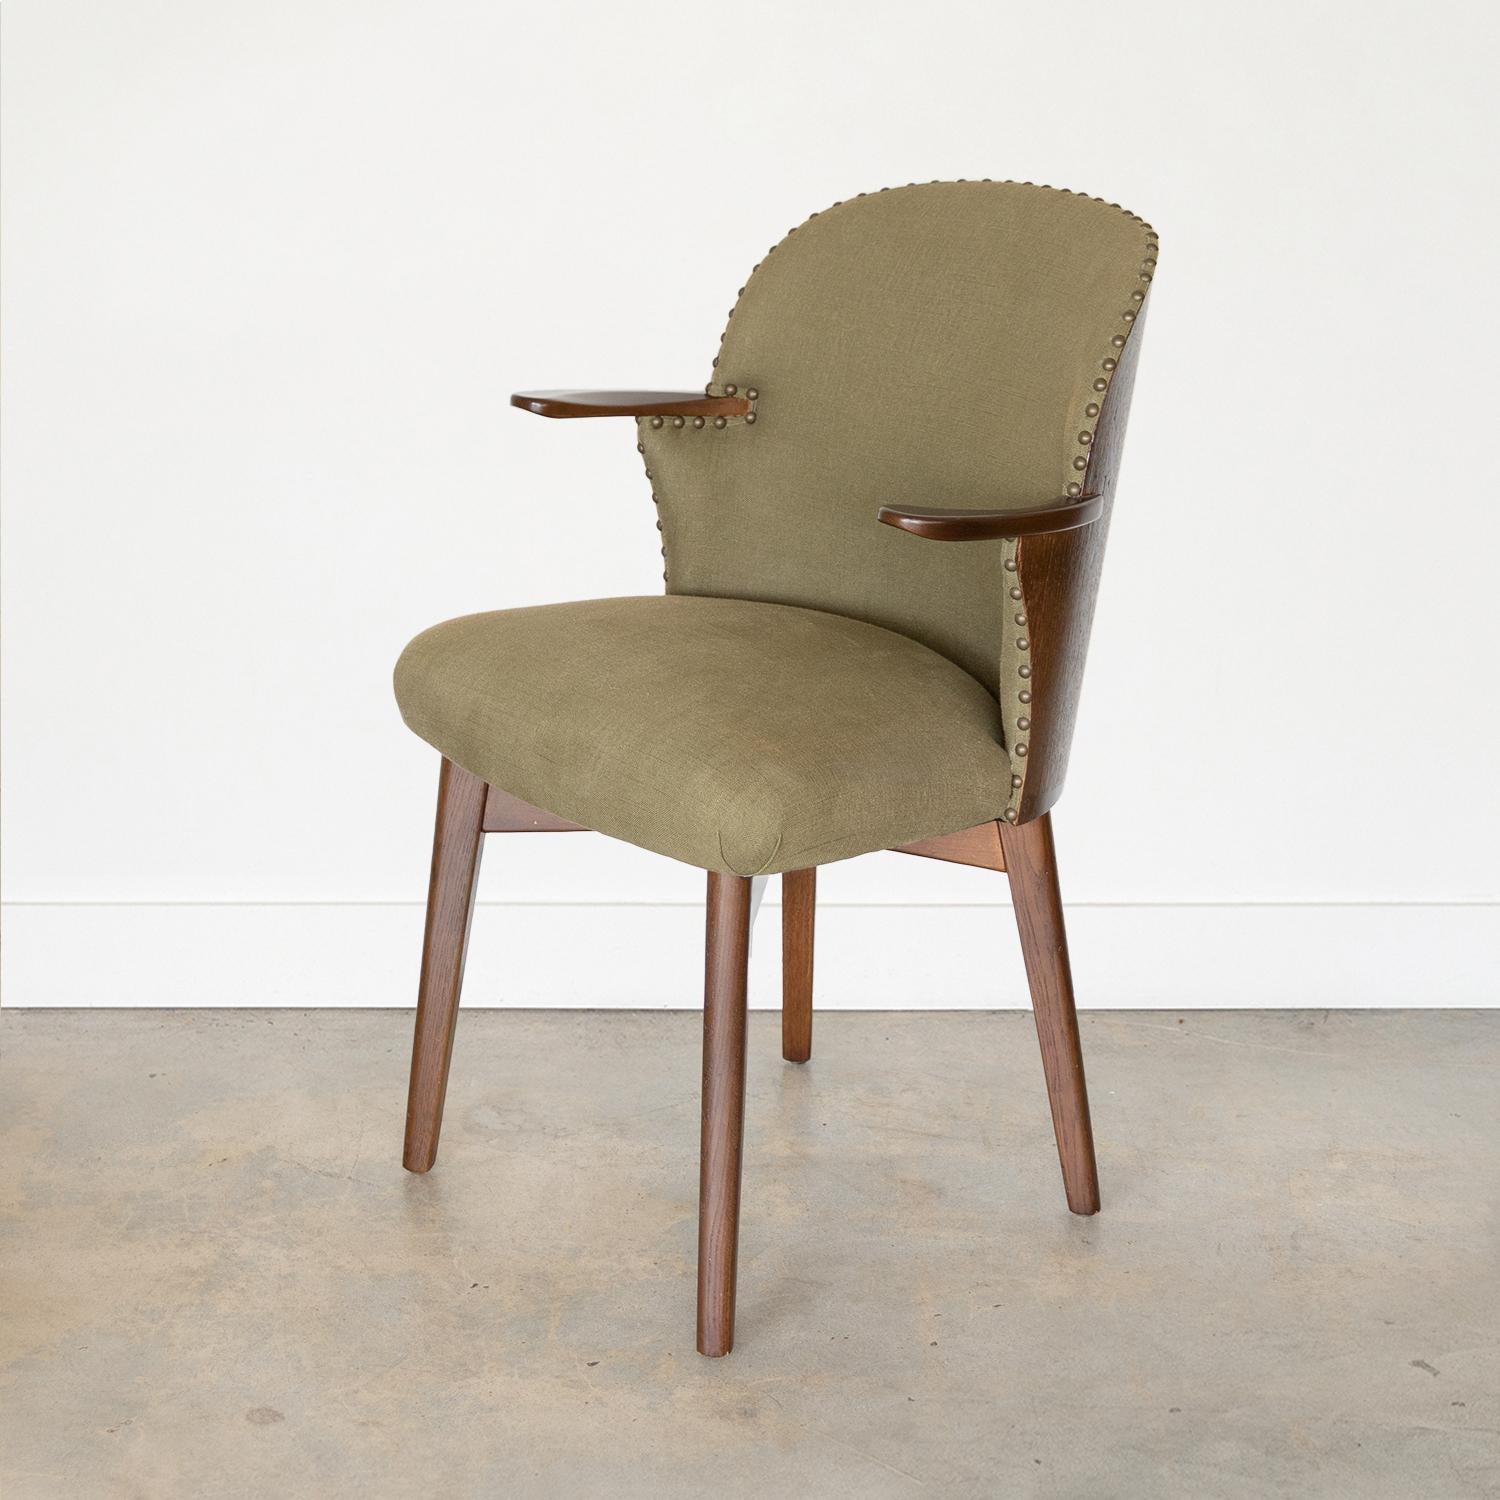 1960's Linen and Wood Chair In Good Condition For Sale In Los Angeles, CA